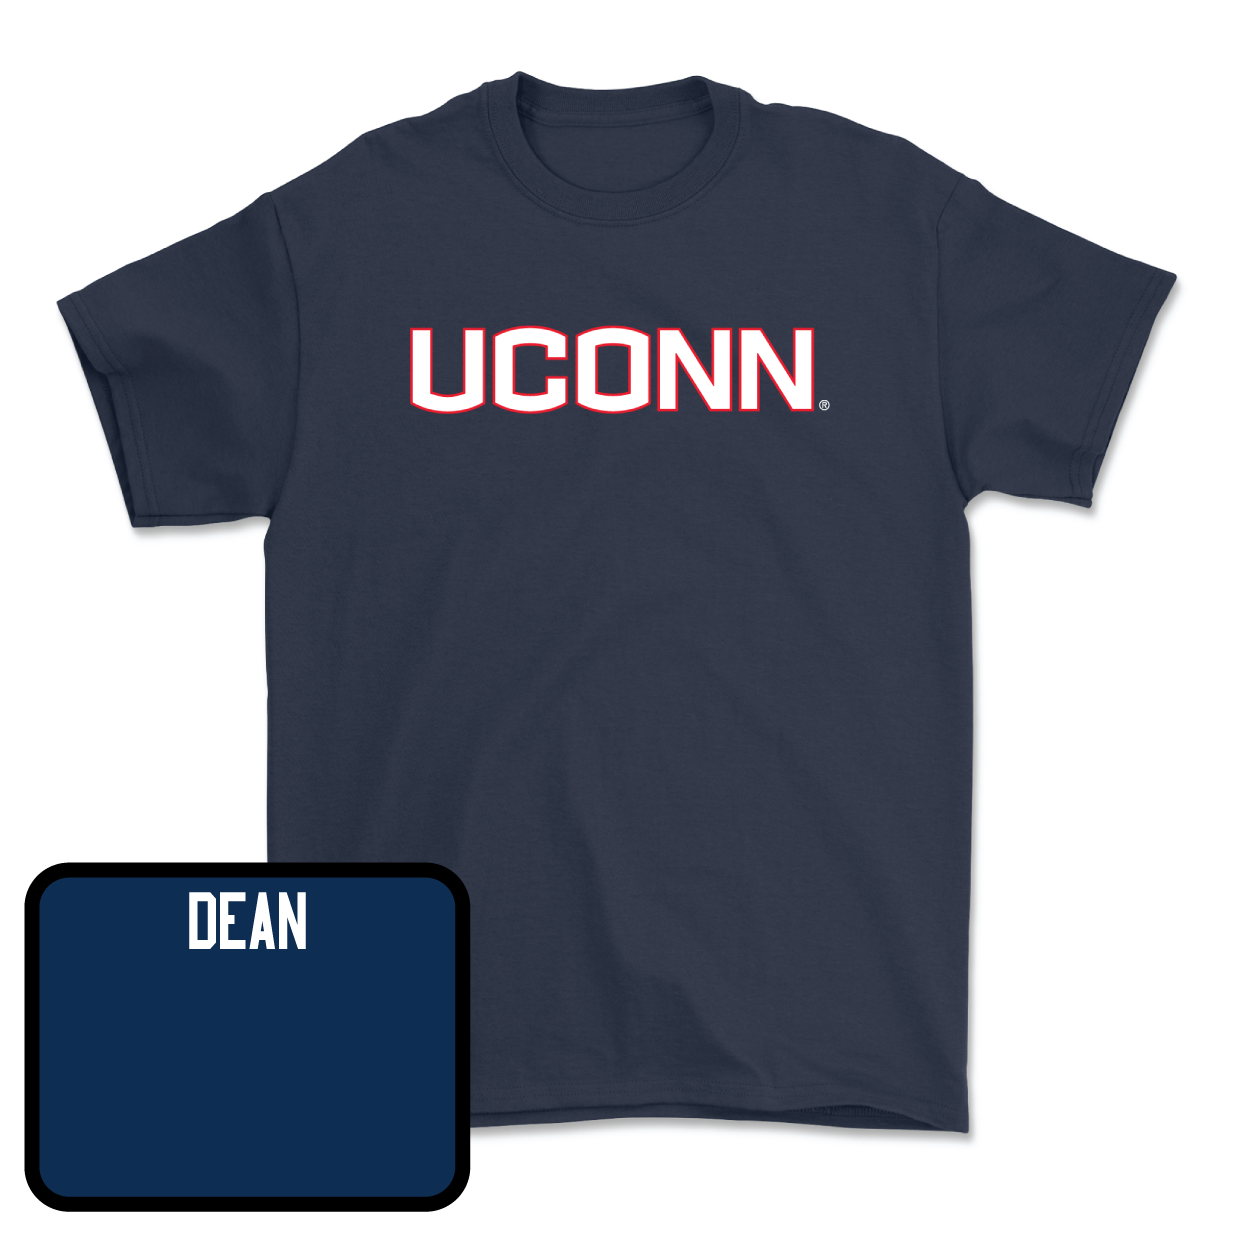 Navy Women's Rowing UConn Tee Youth Large / Erica Dean